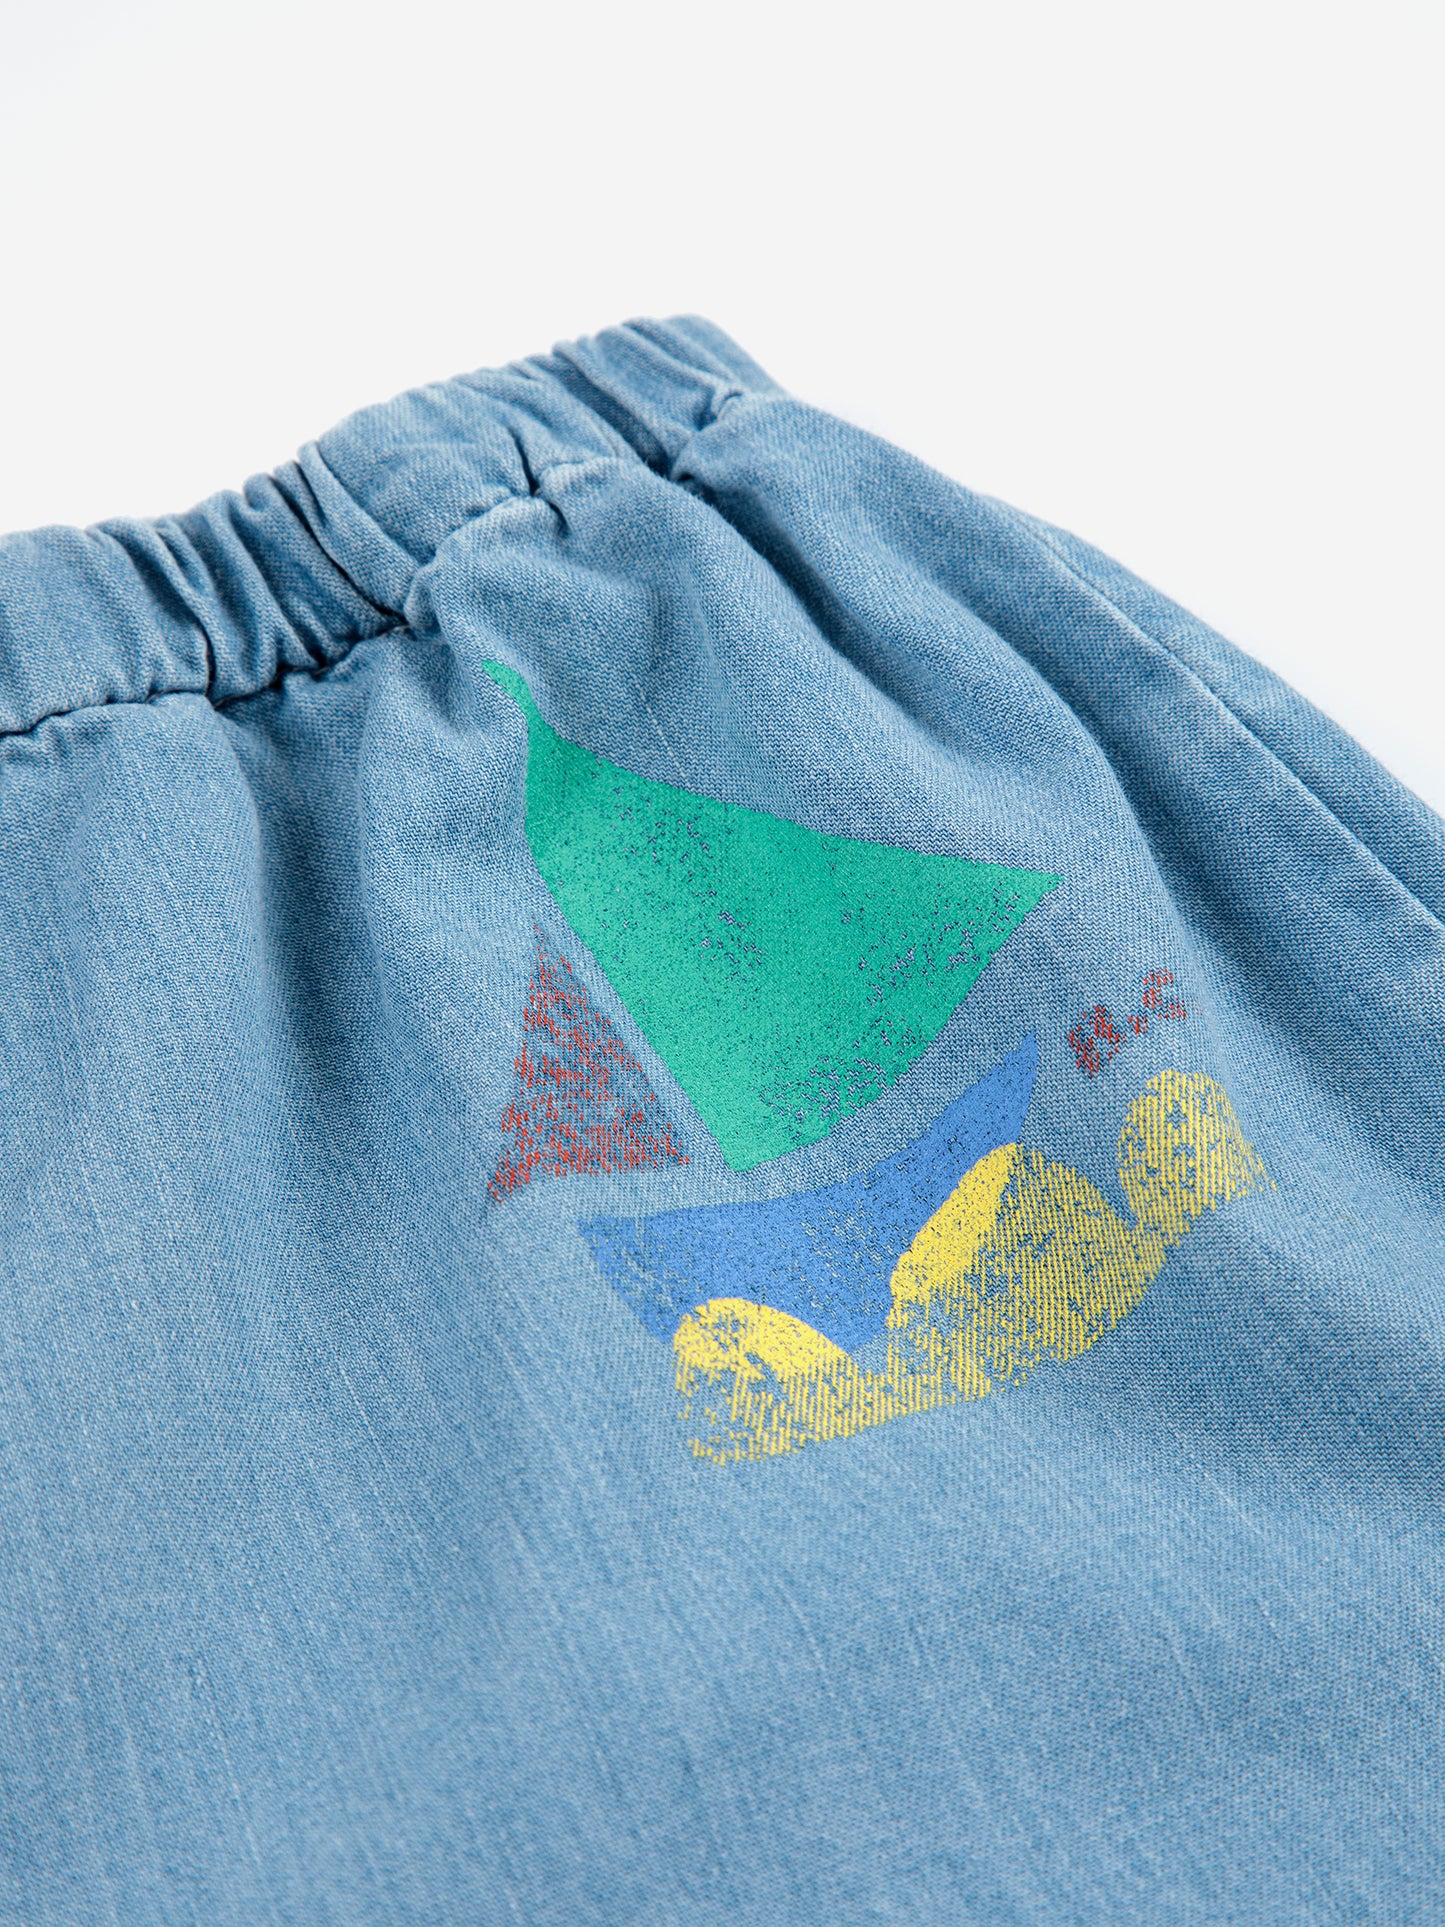 Multicolor Sail Boat - Woven Trousers  Baby